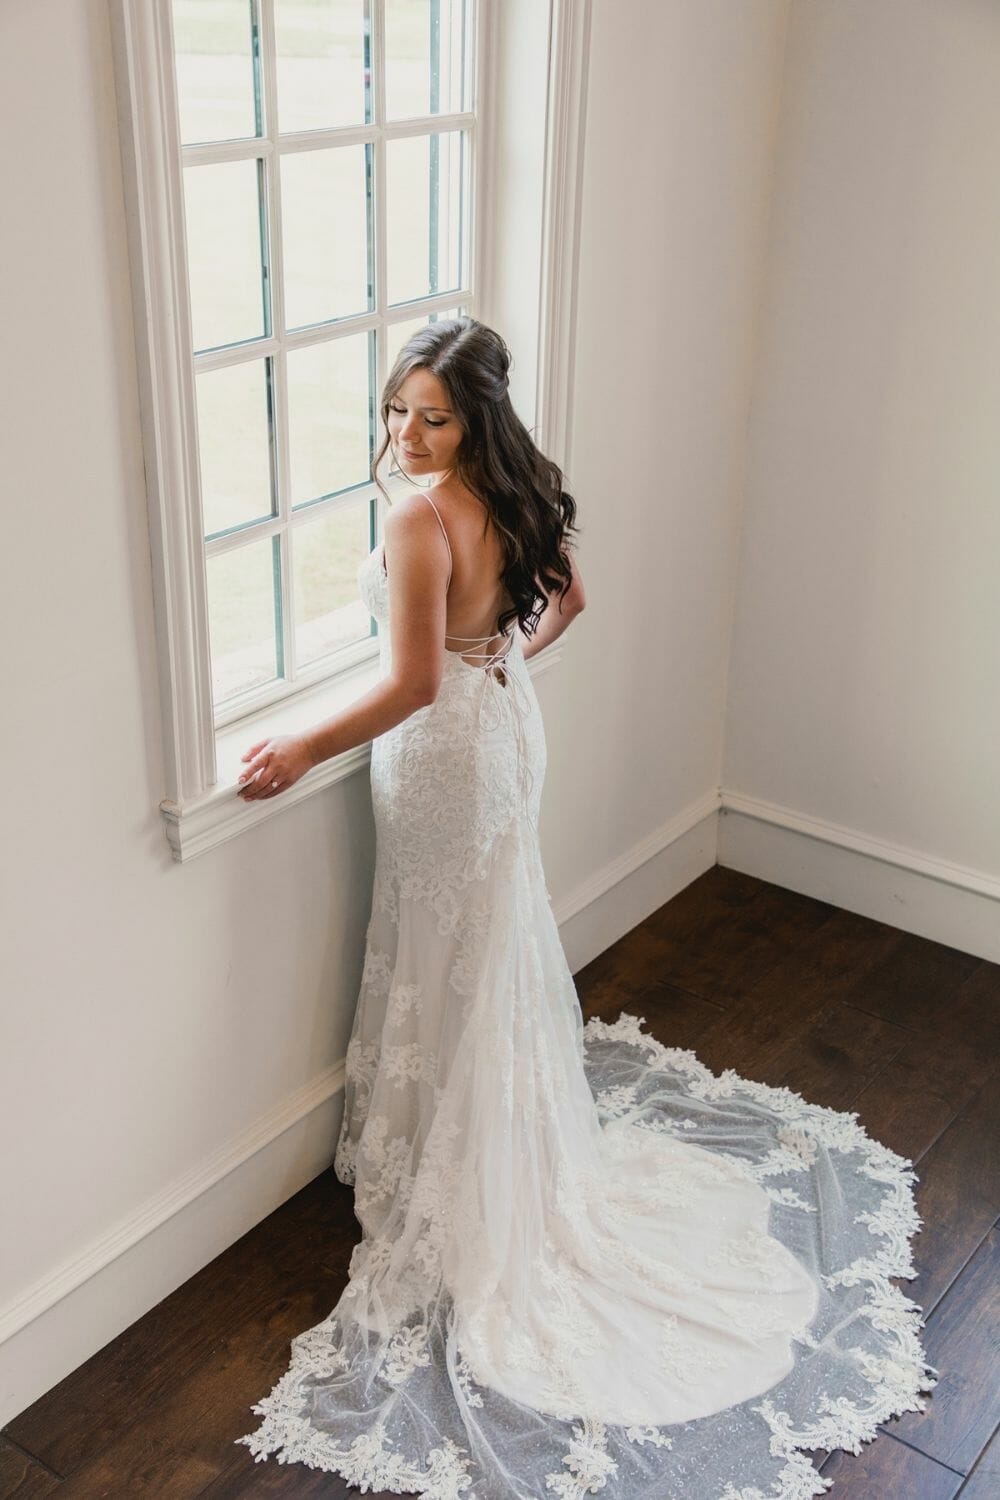 Bride standing at window in a Trumpet-Mermaid Wedding Dress photo by Cortnie Dee Photography